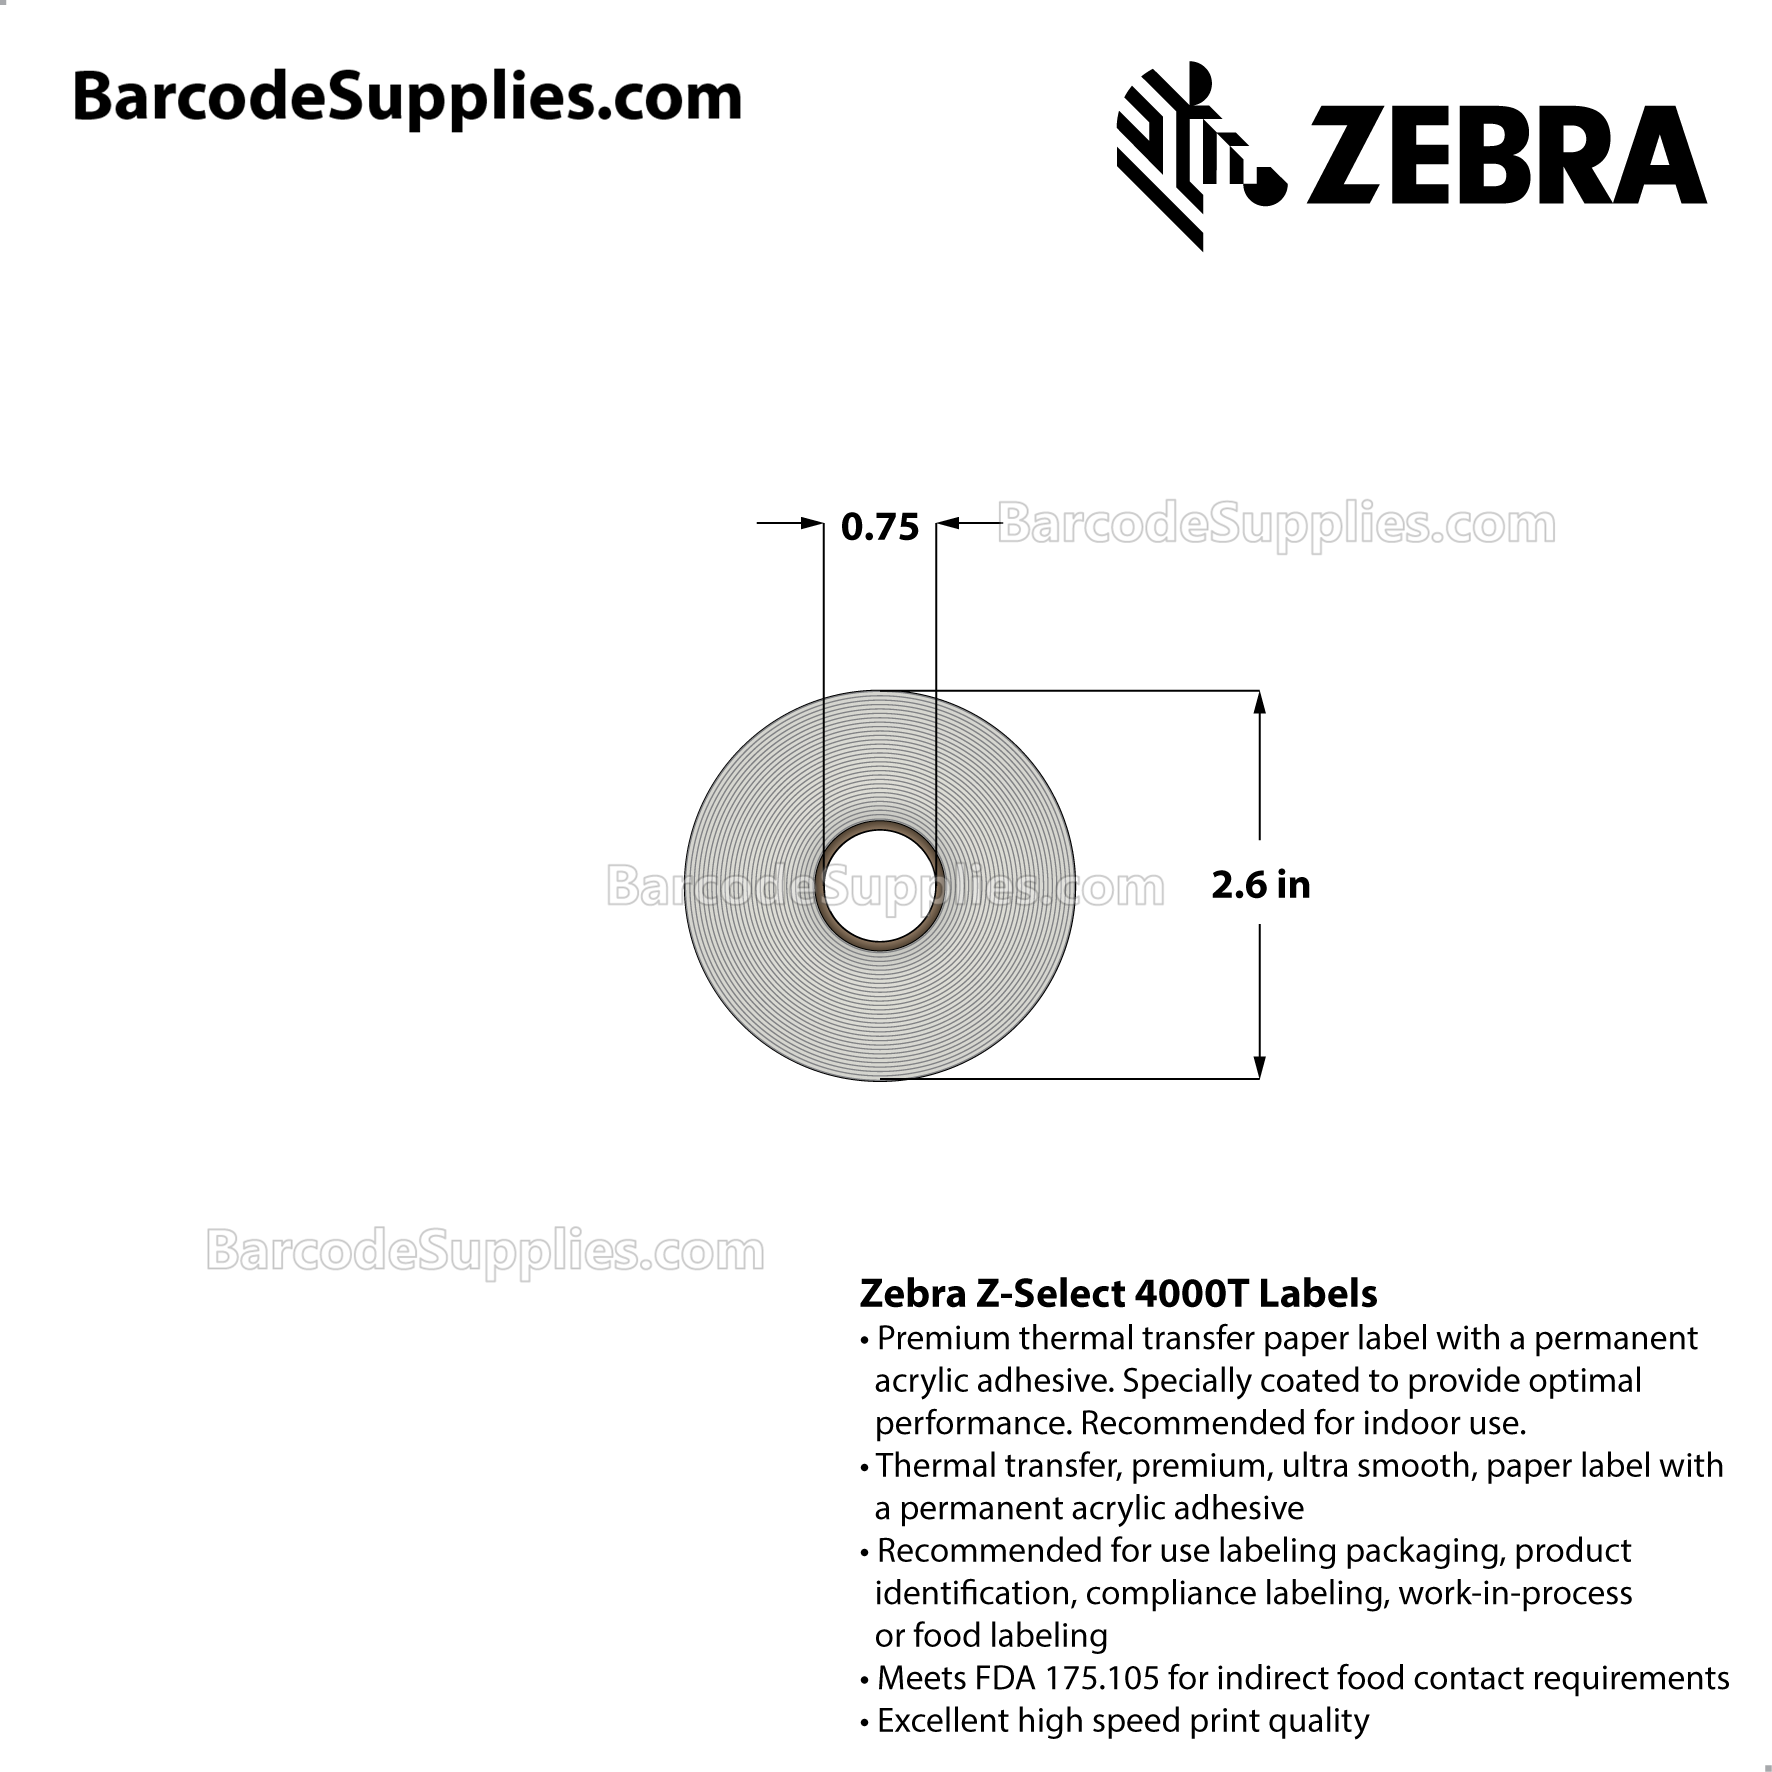 4 x 6 Thermal Transfer White Z-Select 4000T Labels With Permanent Adhesive - Not Perforated - 110 Labels Per Roll - Carton Of 16 Rolls - 1760 Labels Total - MPN: 10008549